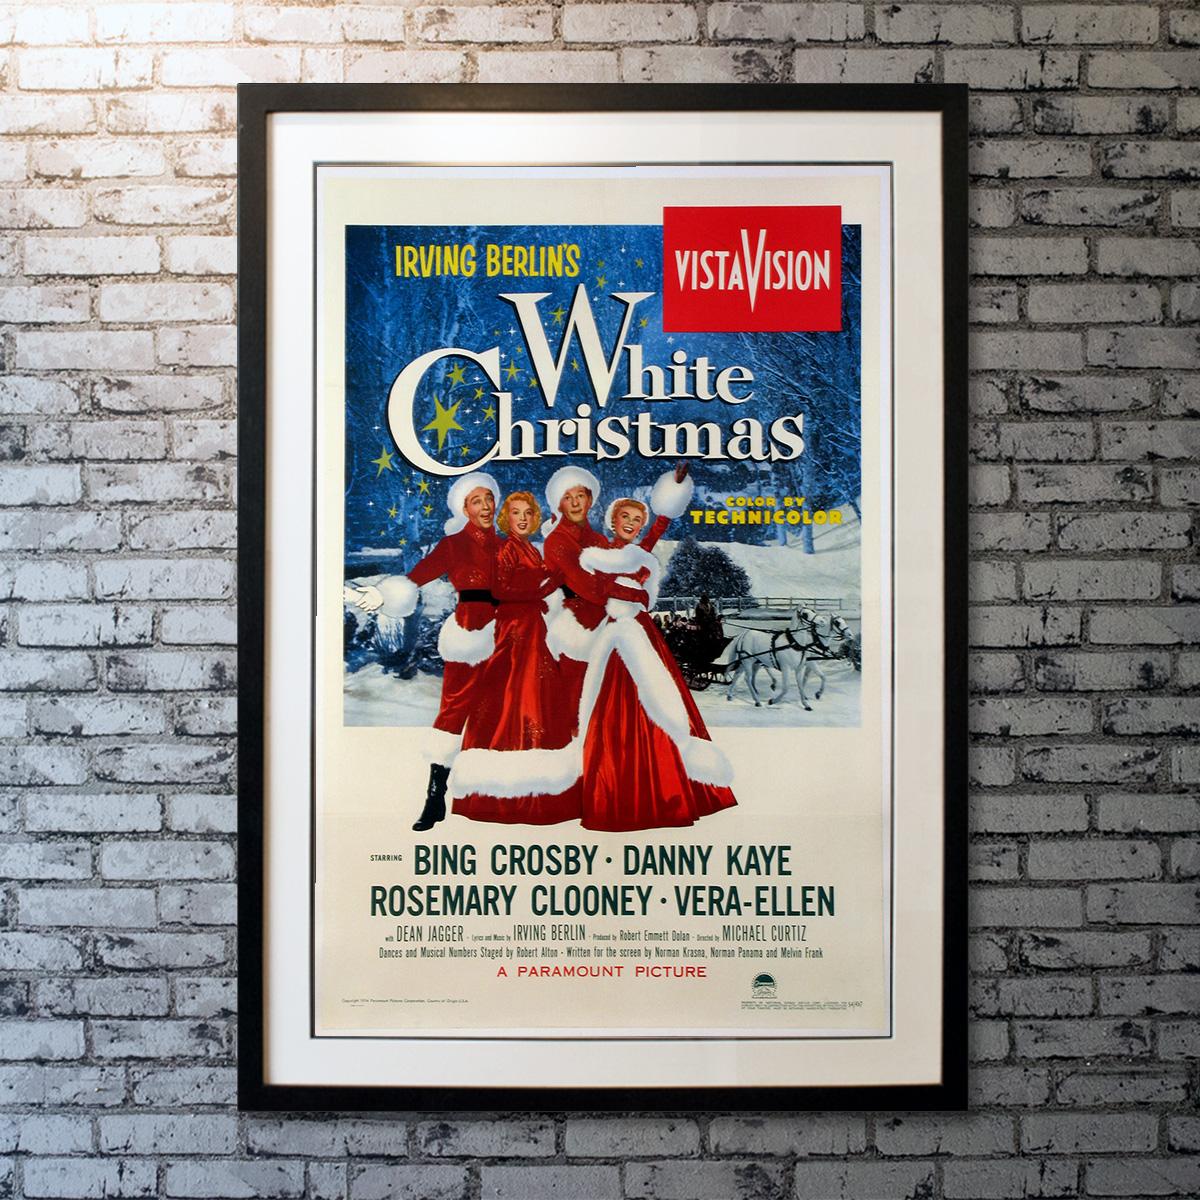 Holiday Classic with Bing Crosby, Danny Kaye, Rosemary Clooney, Vera-Ellen. Singers Bob Wallace (Bing Crosby) and Phil Davis (Danny Kaye) join sister act Betty (Rosemary Clooney) and Judy Haynes (Vera-Ellen) to perform a Christmas show in rural